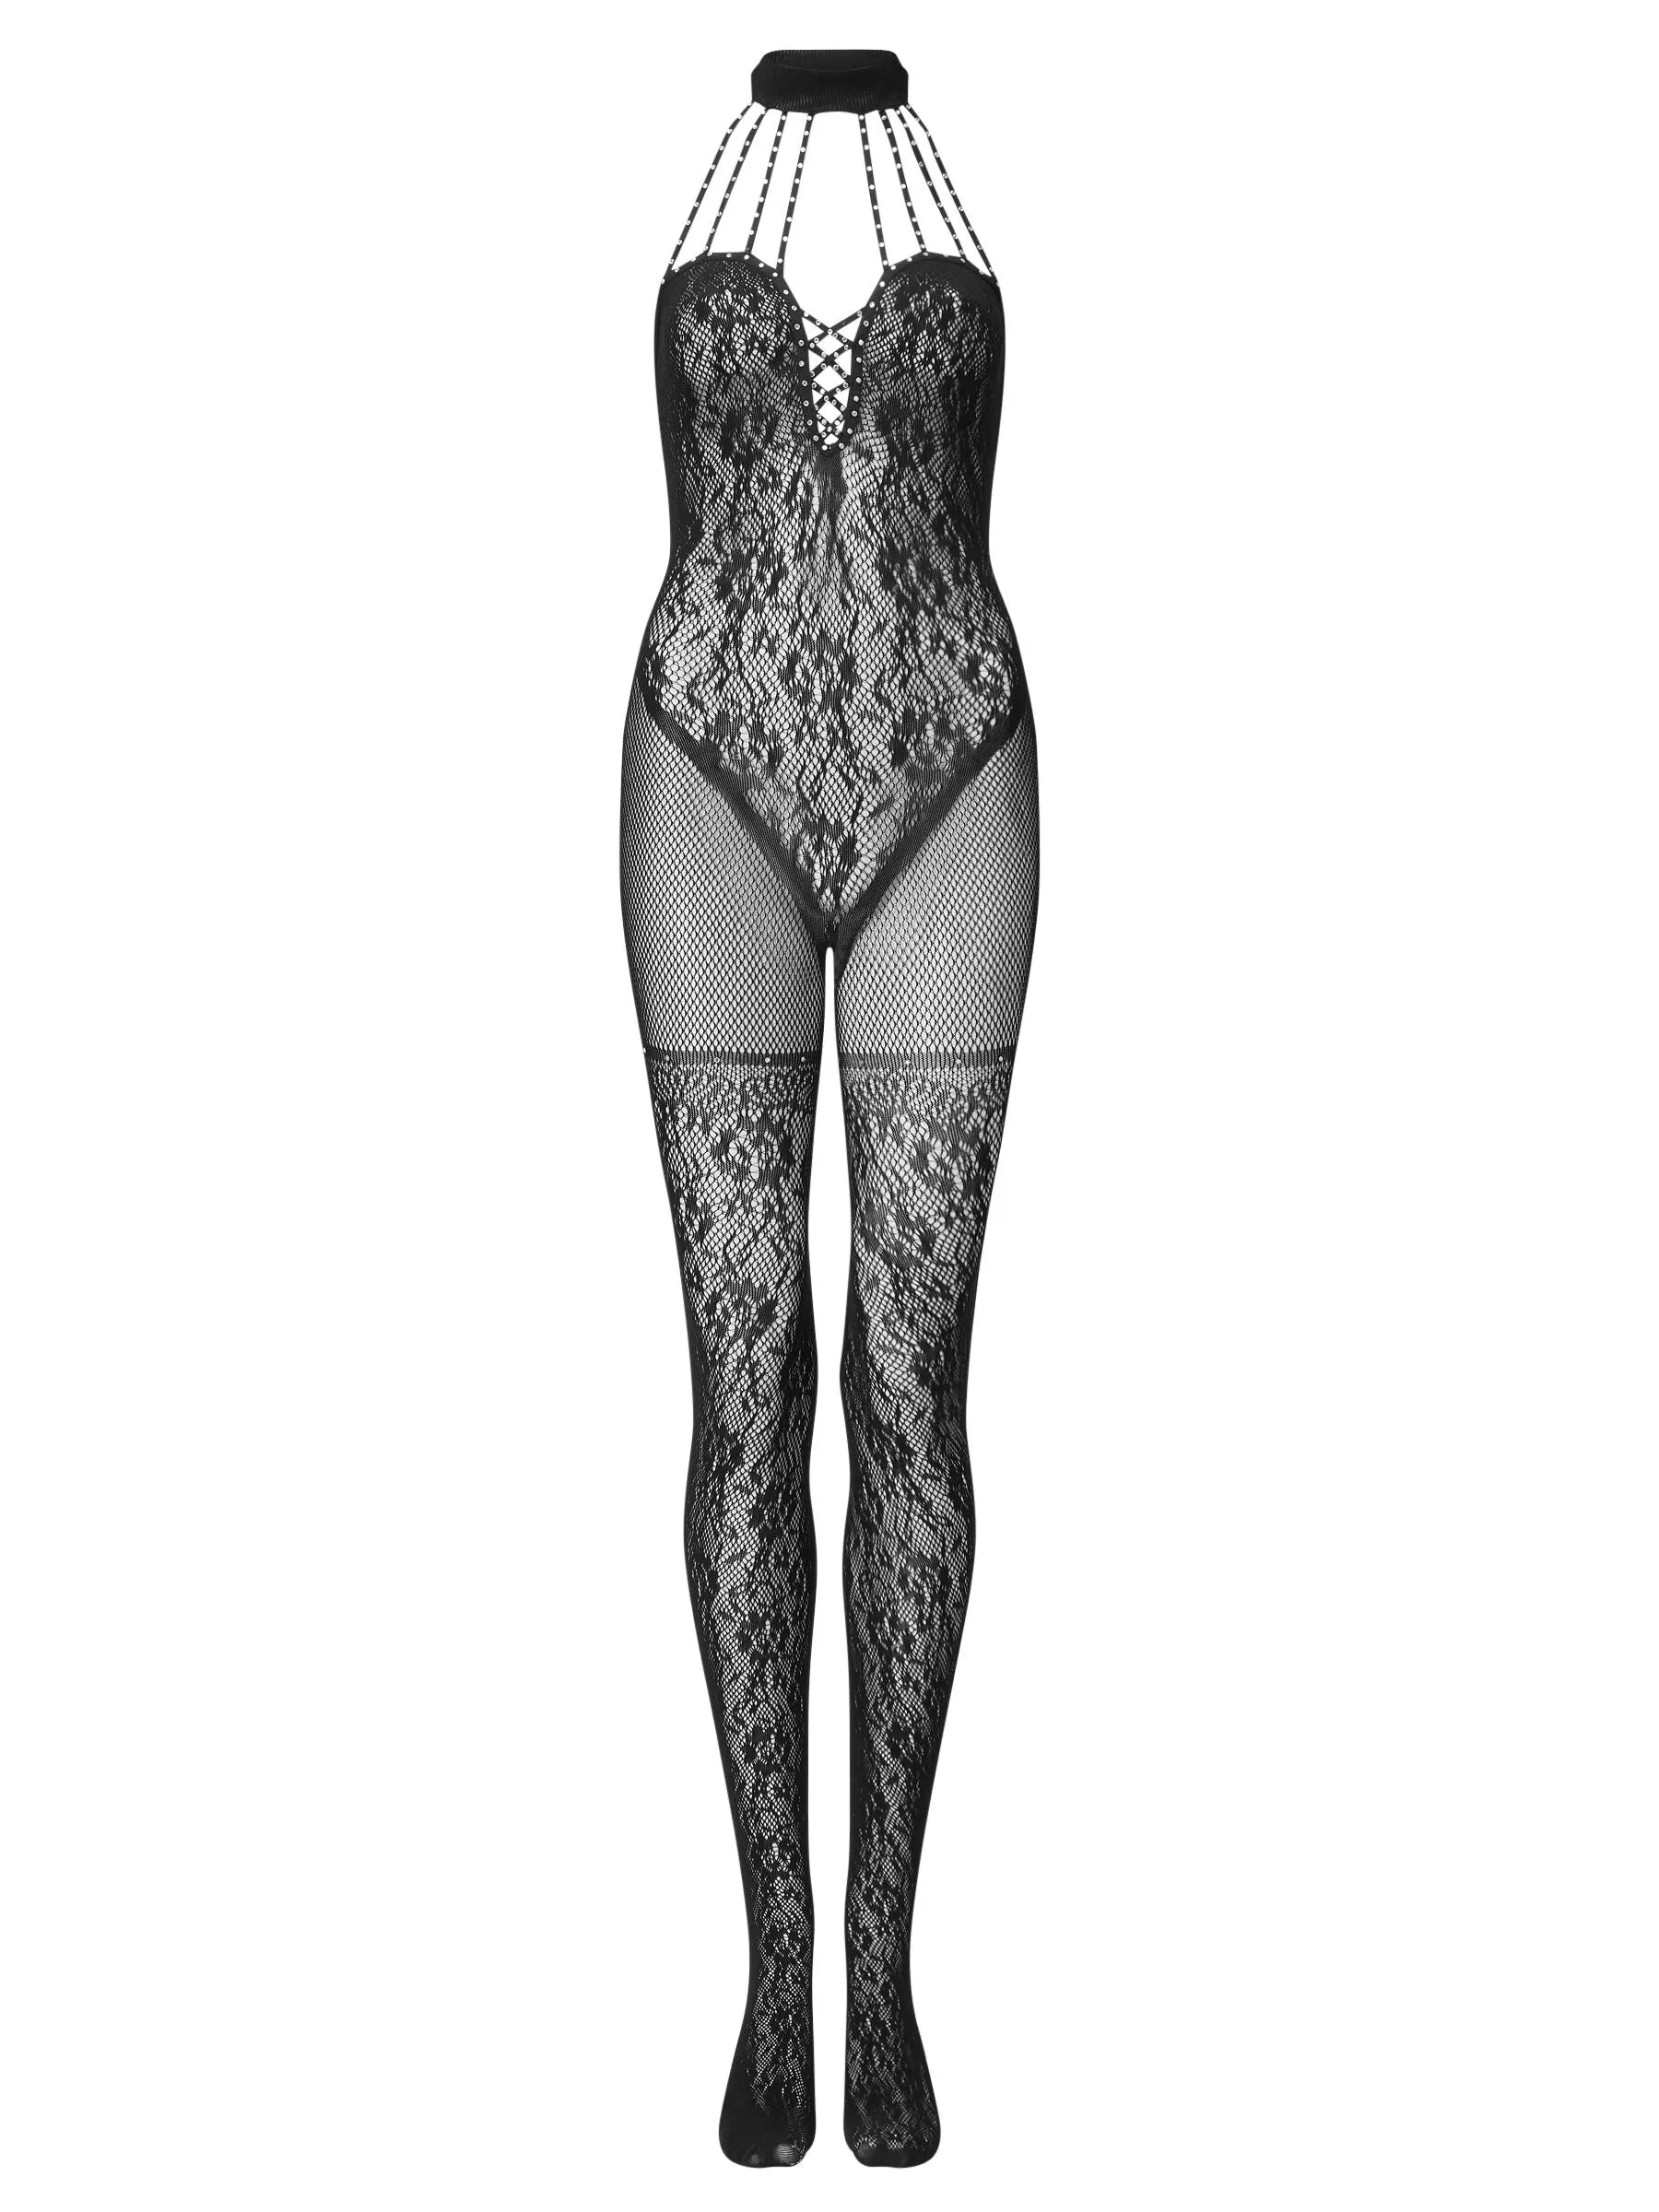 Dynamo Crotchless Bodystocking from Ann Summers Image 03